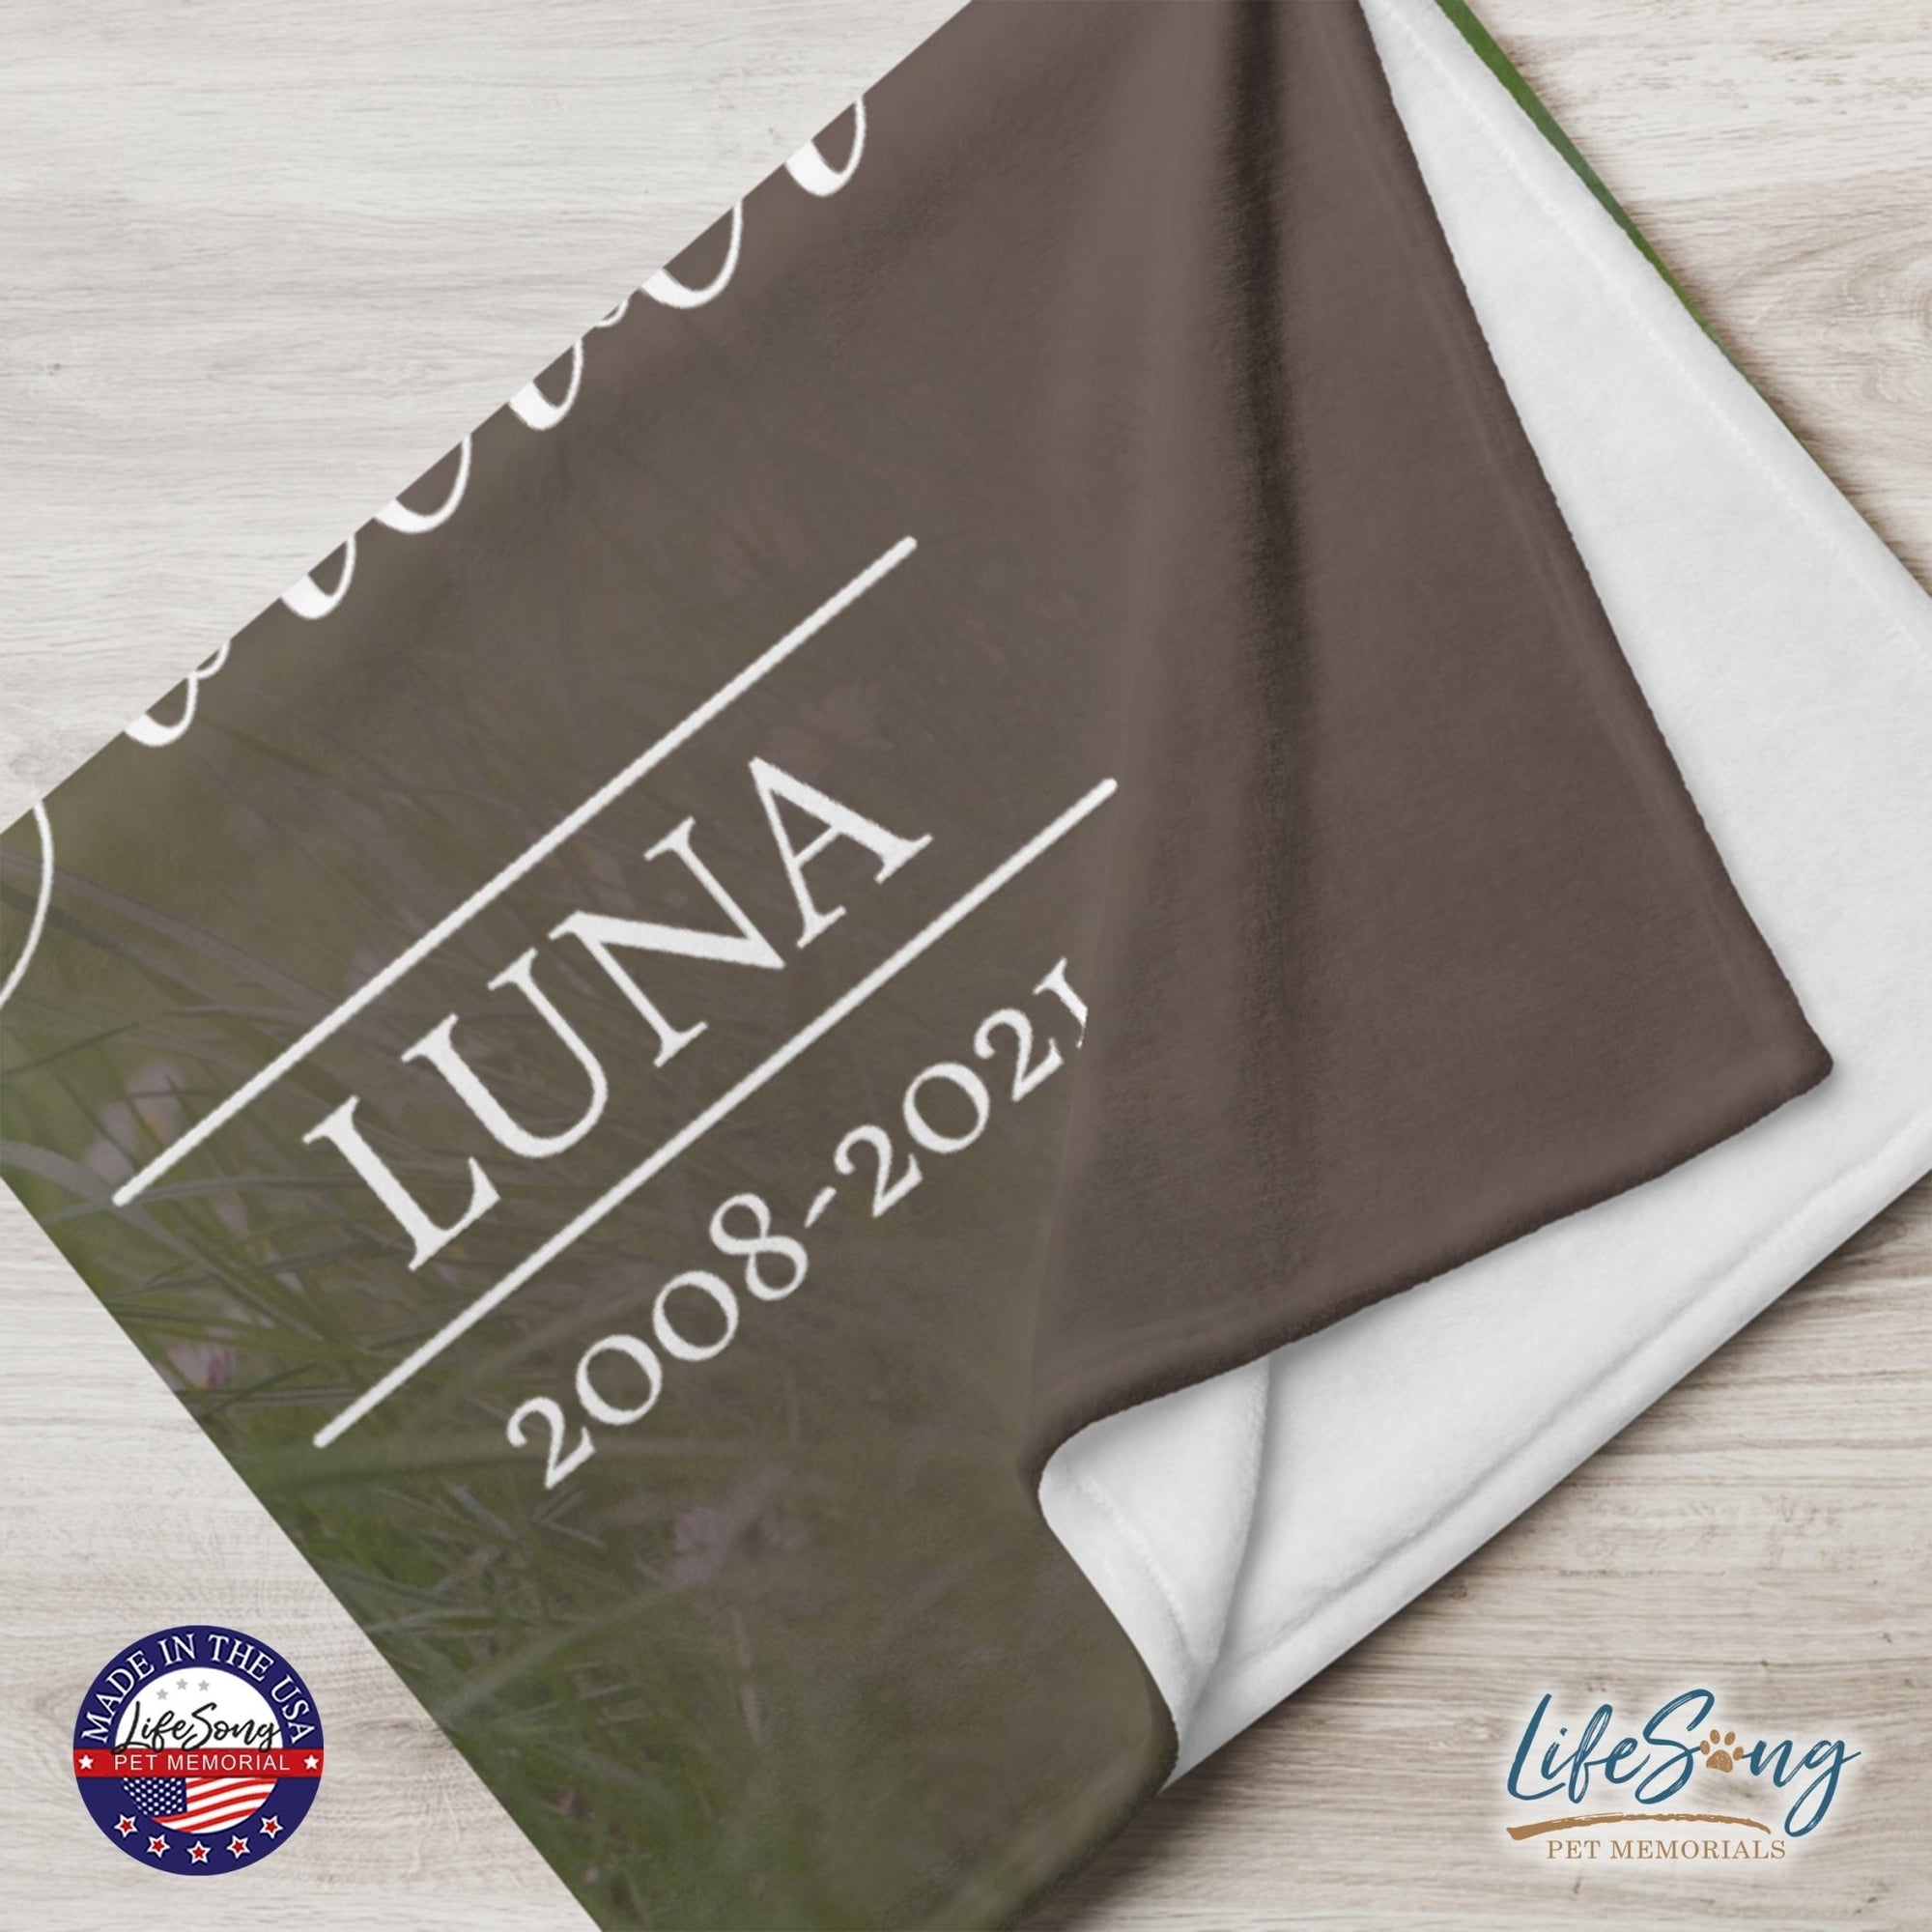 Personalized Pet Memorial Printed Throw Blanket - If Love Could Have Saved You - LifeSong Milestones